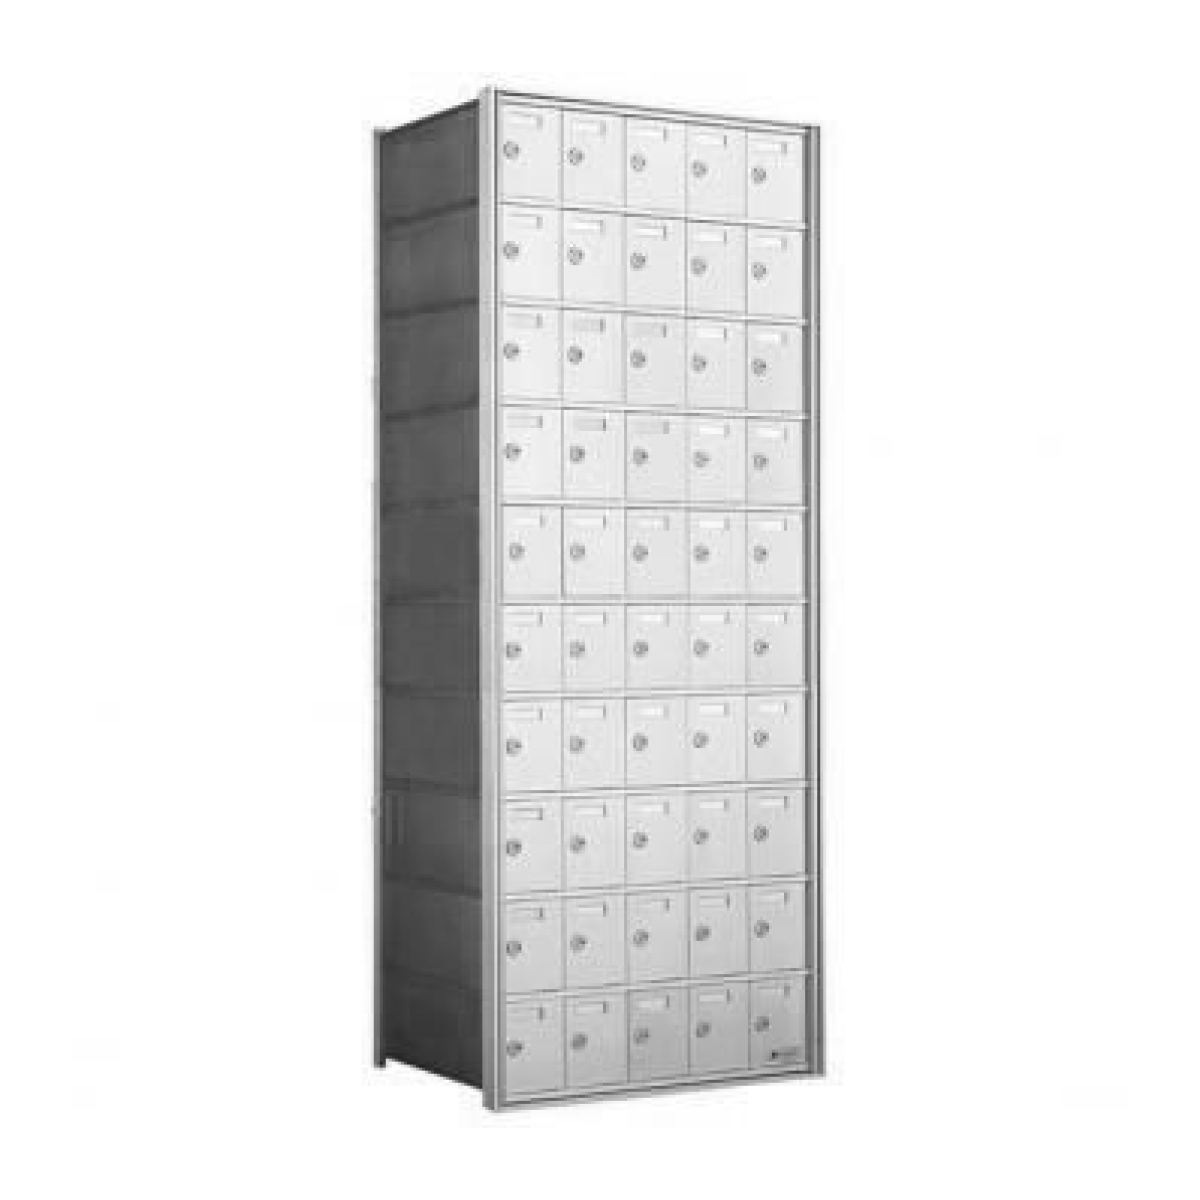 10 Doors High x 5 Doors (50 Tenants) 1700 Series Rear-Load Private Distribution Horizontal Mailbox in Anodized Aluminum Finish Product Image